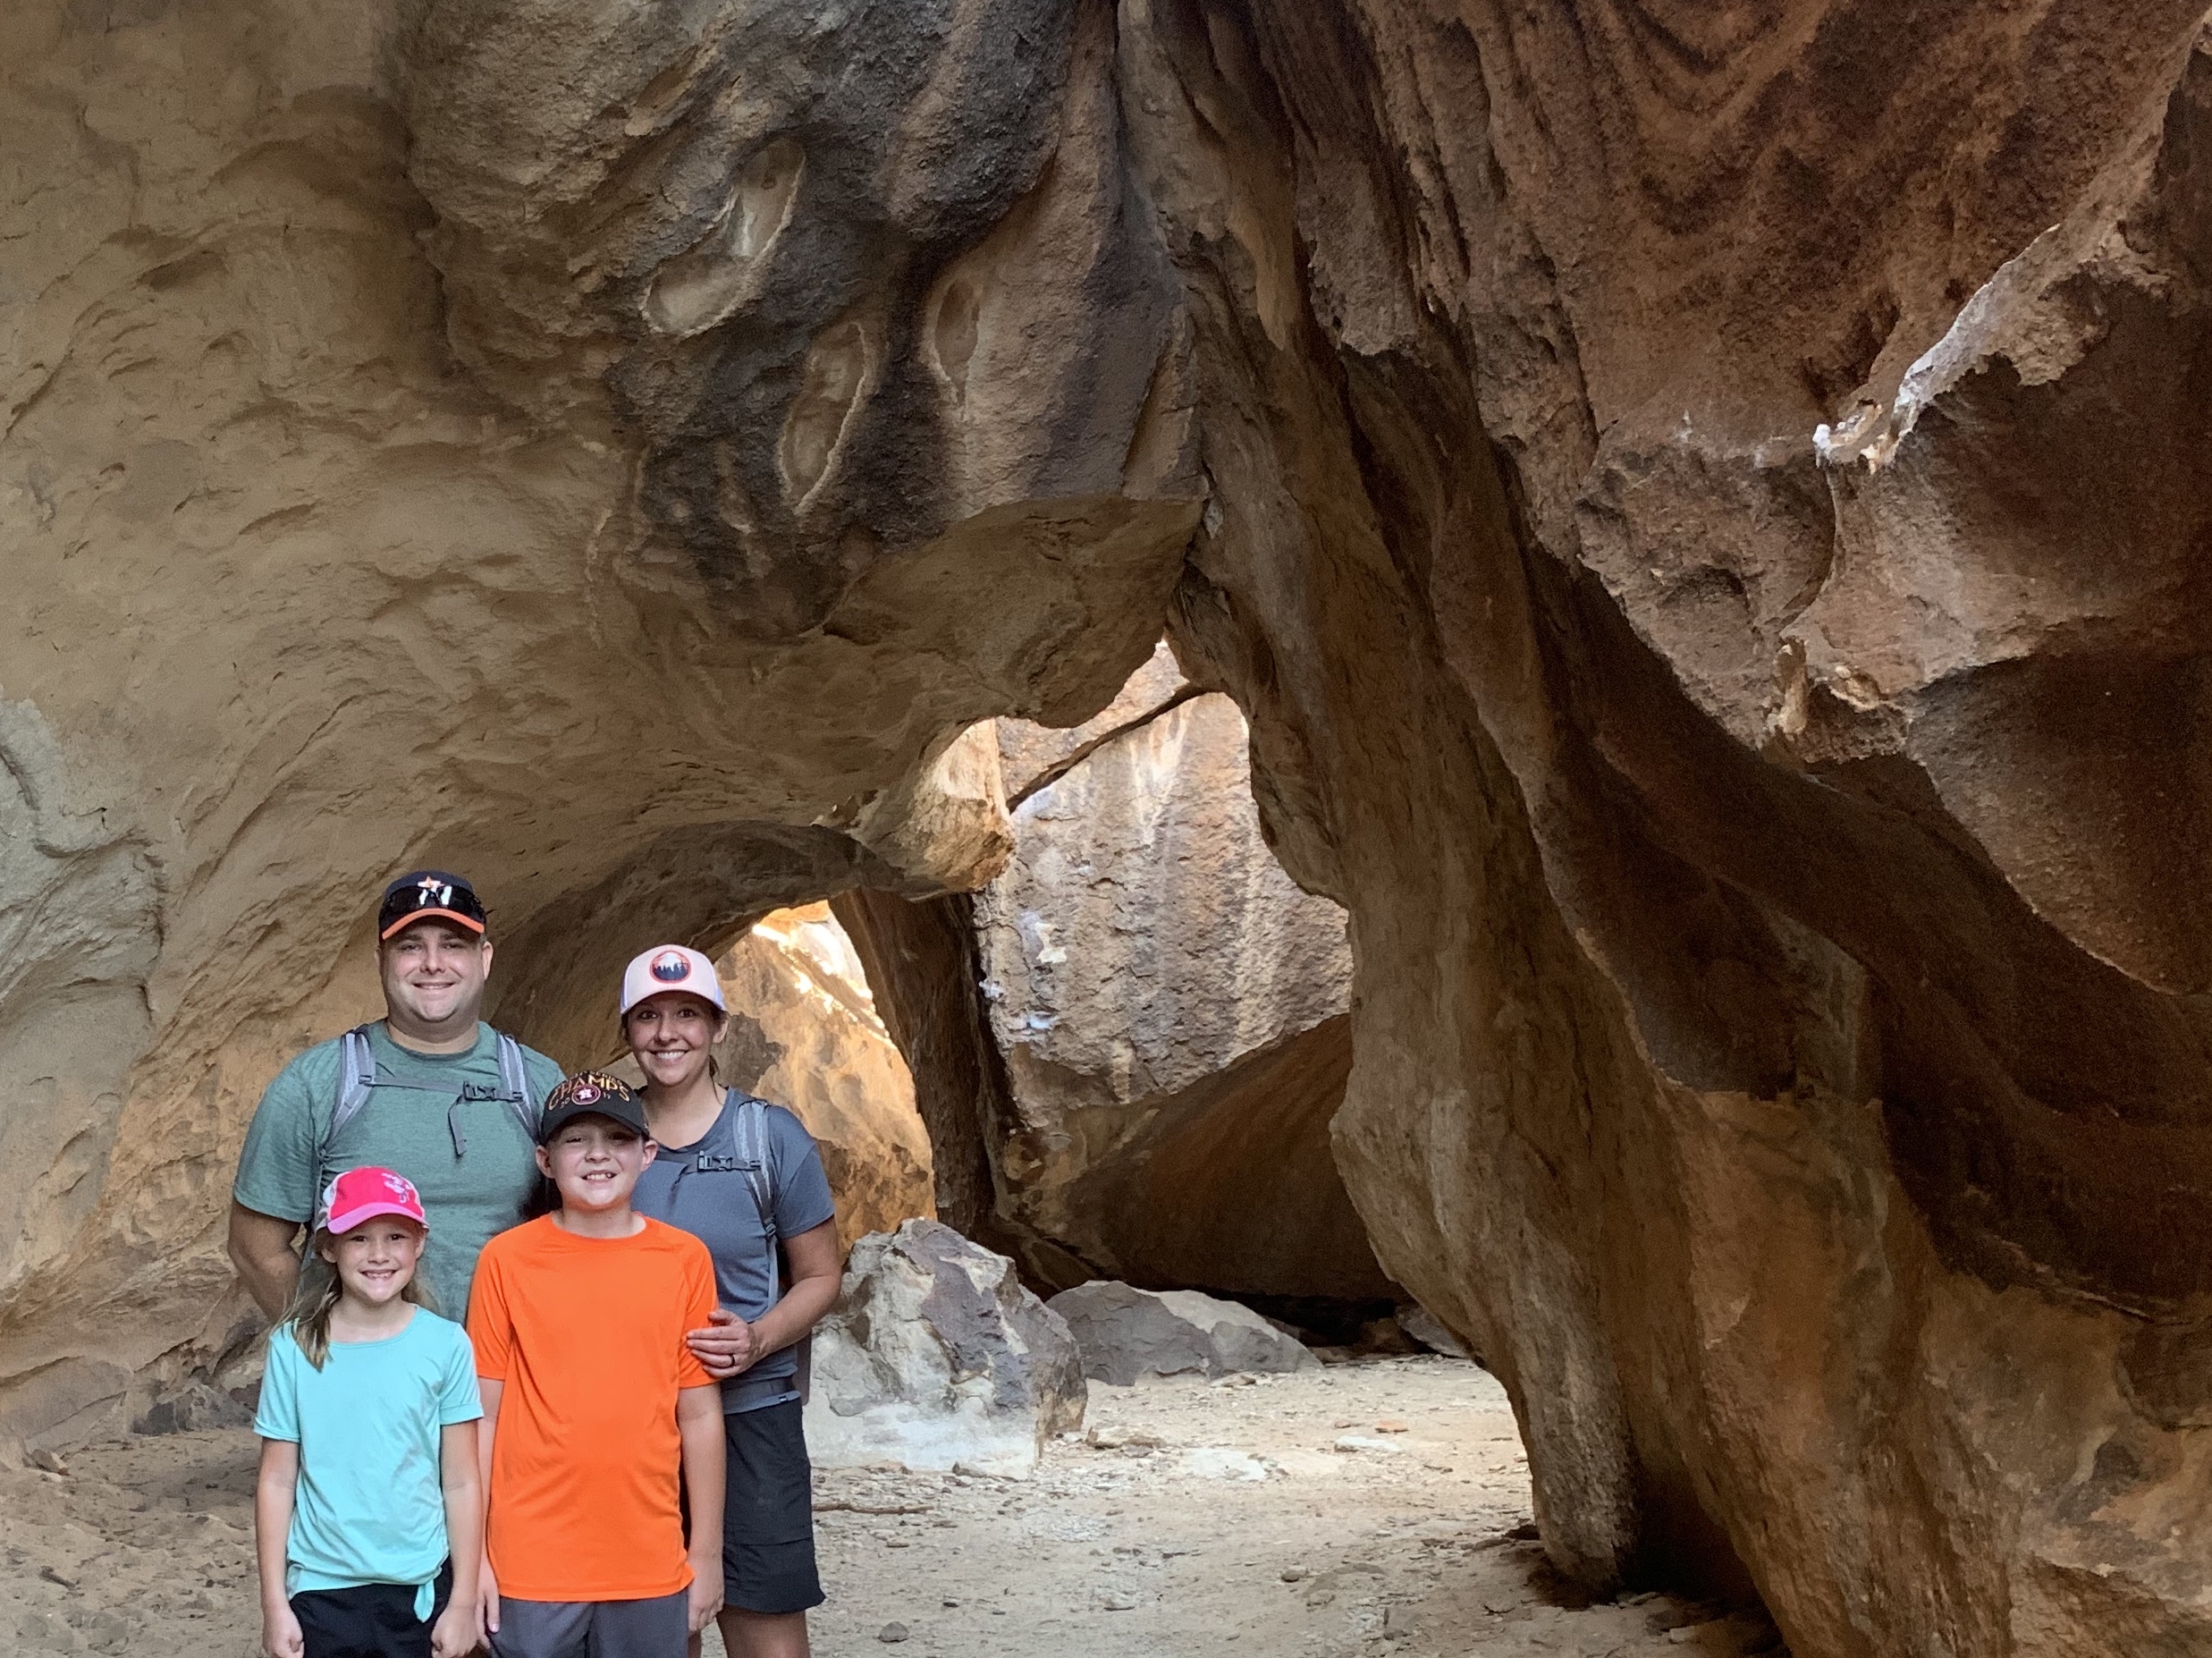 Two parents and their young children in front of an impressive rock formation that looks like a cavern